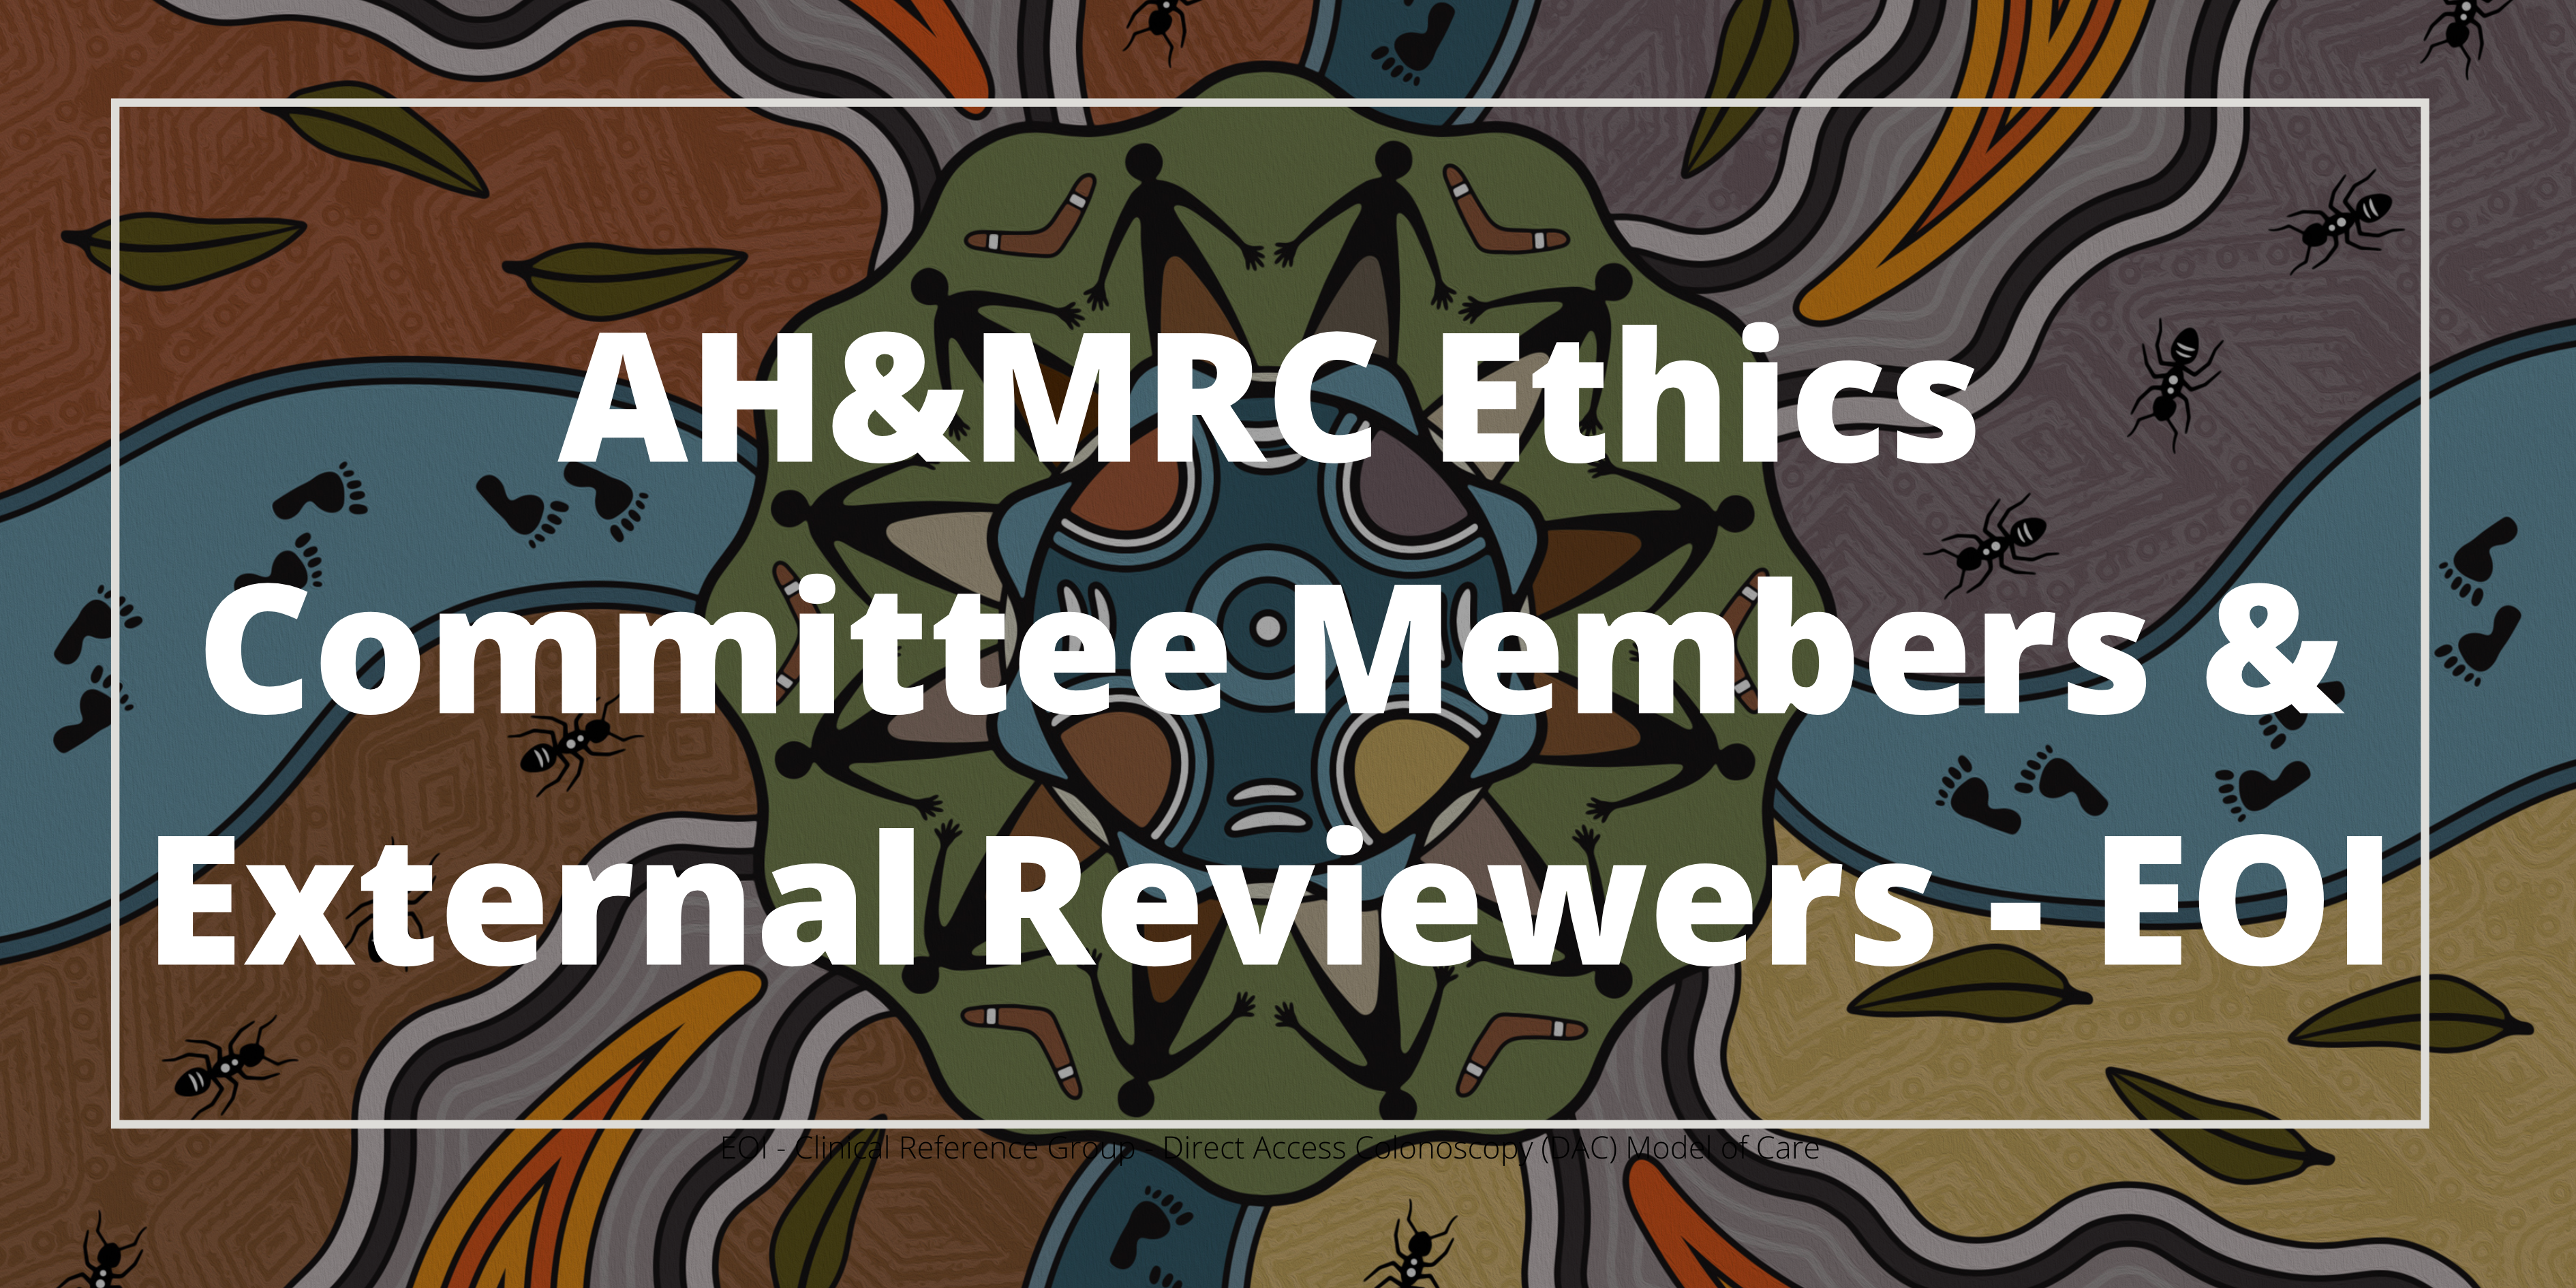 Expressions of Interest for AH&MRC Ethics Committee Members & External Reviewers